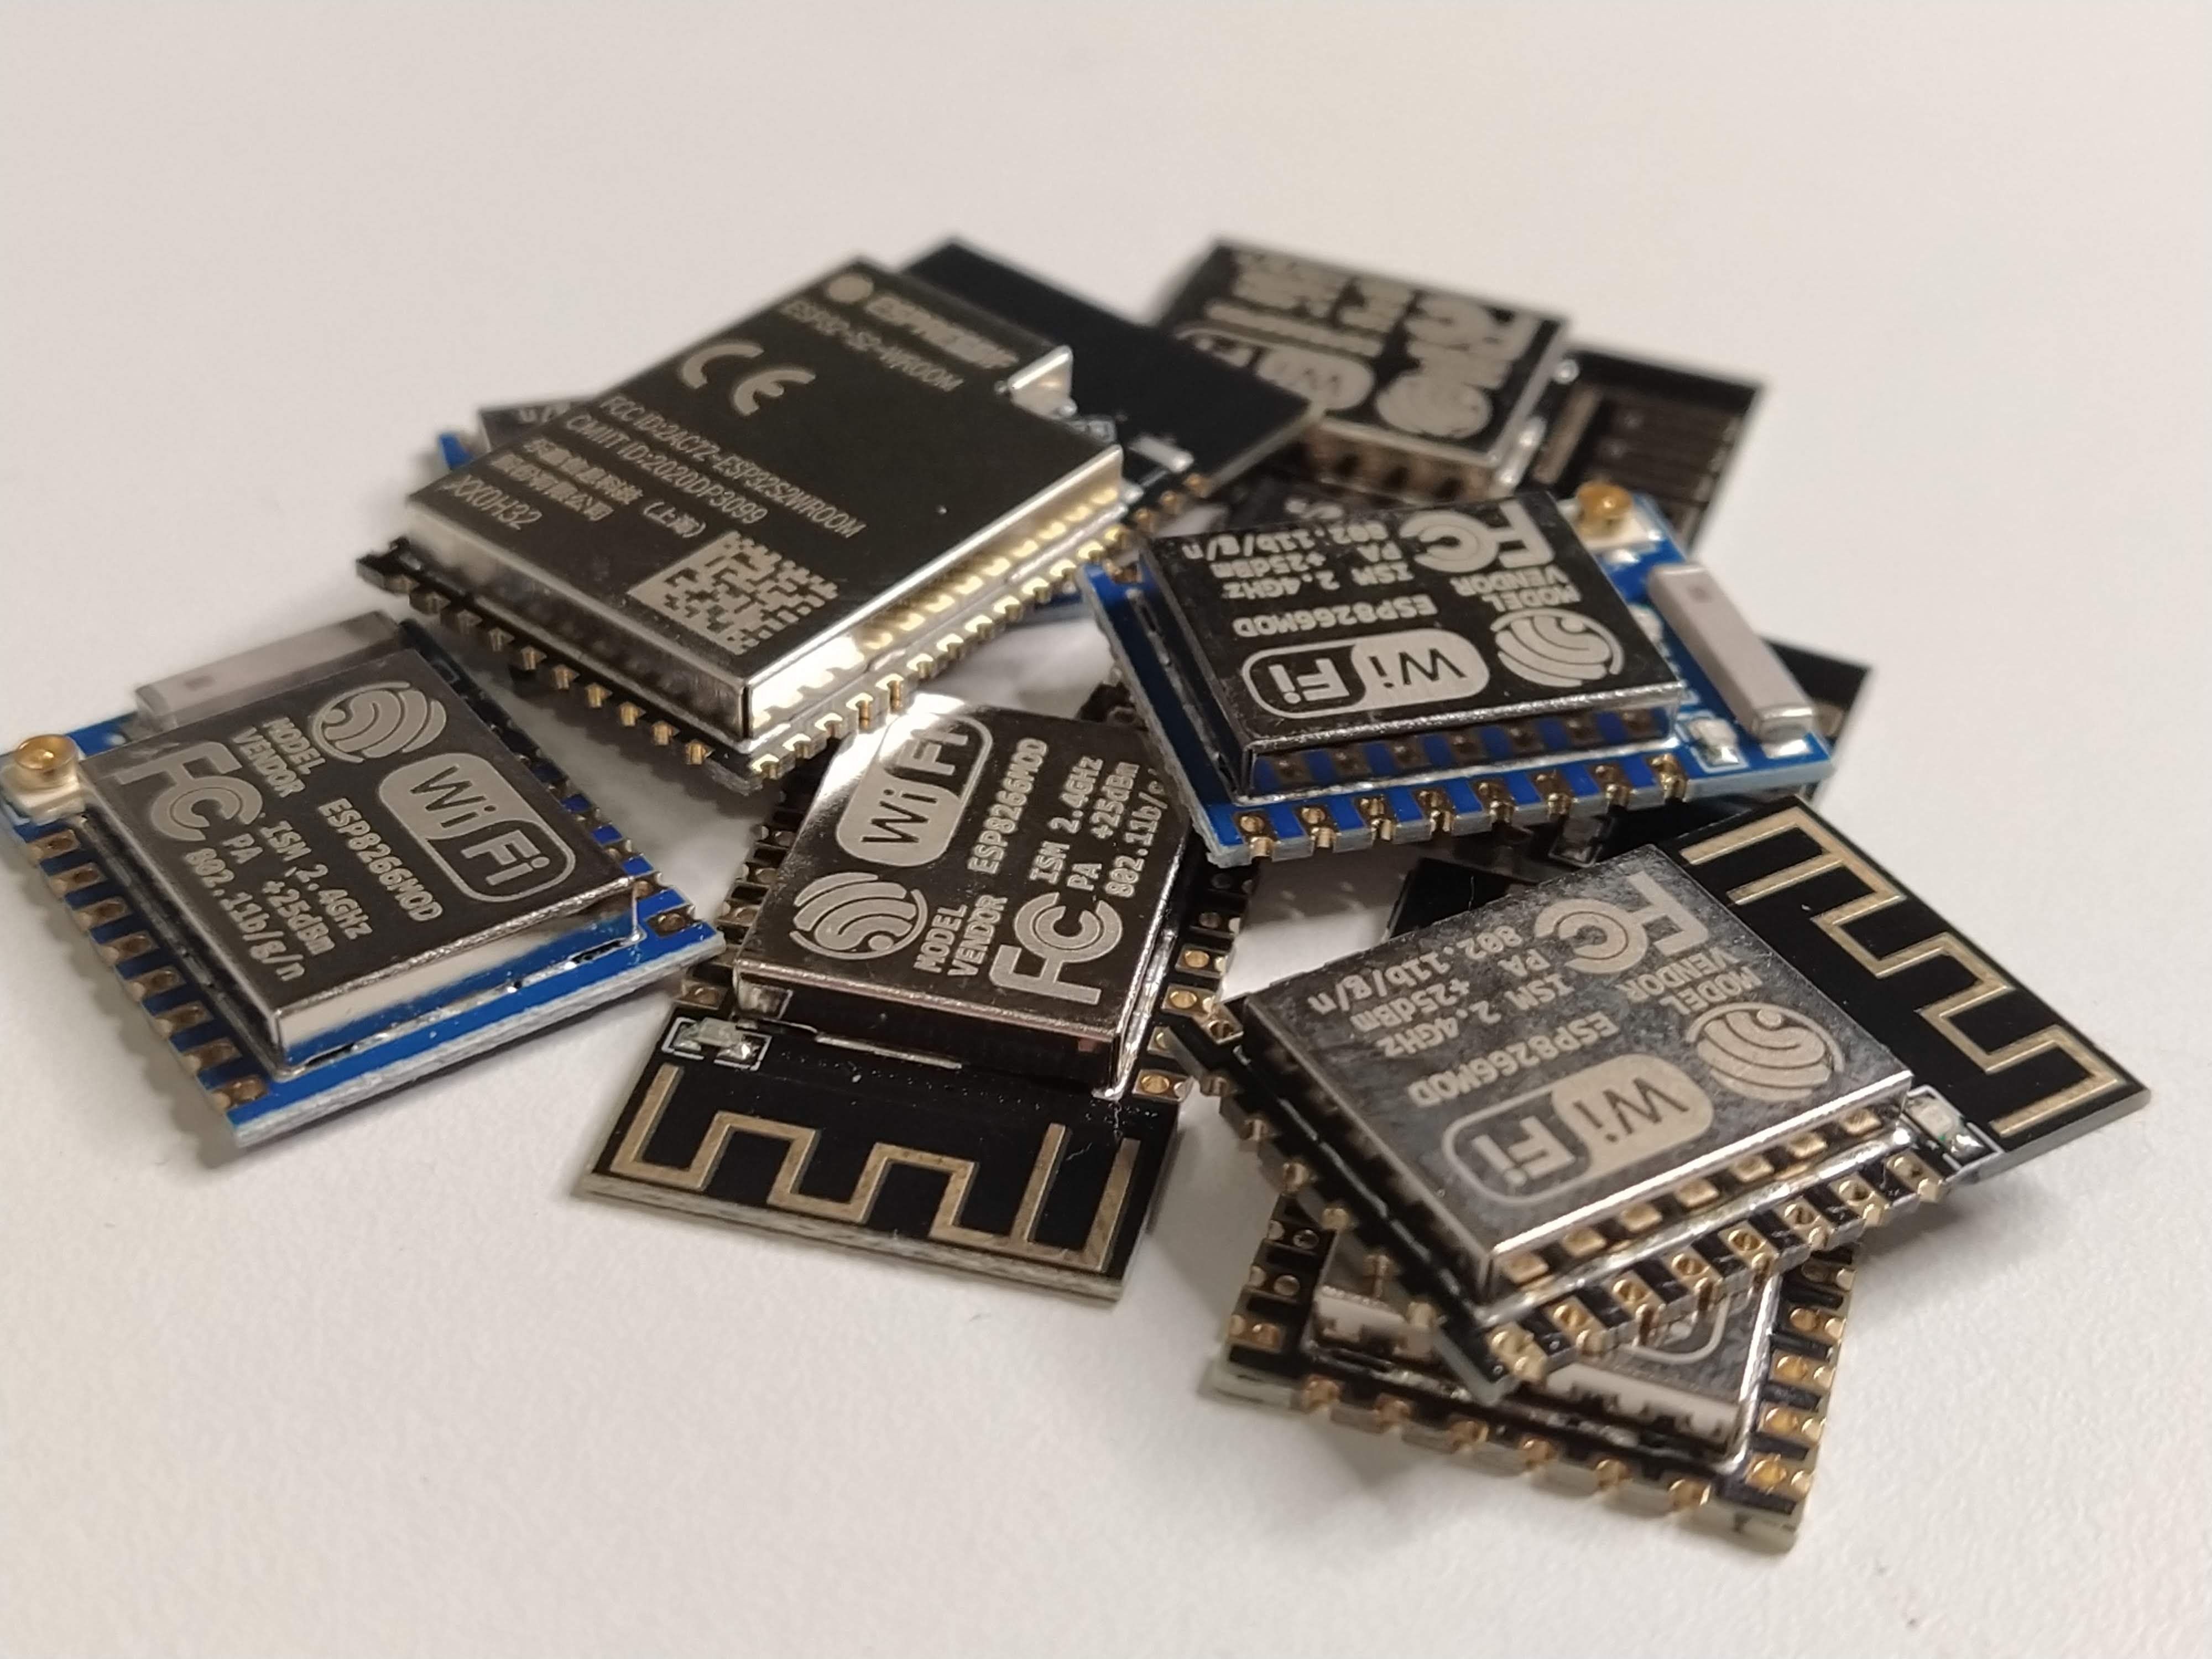 A bunch of ESP8266 and ESP32-S2 modules.